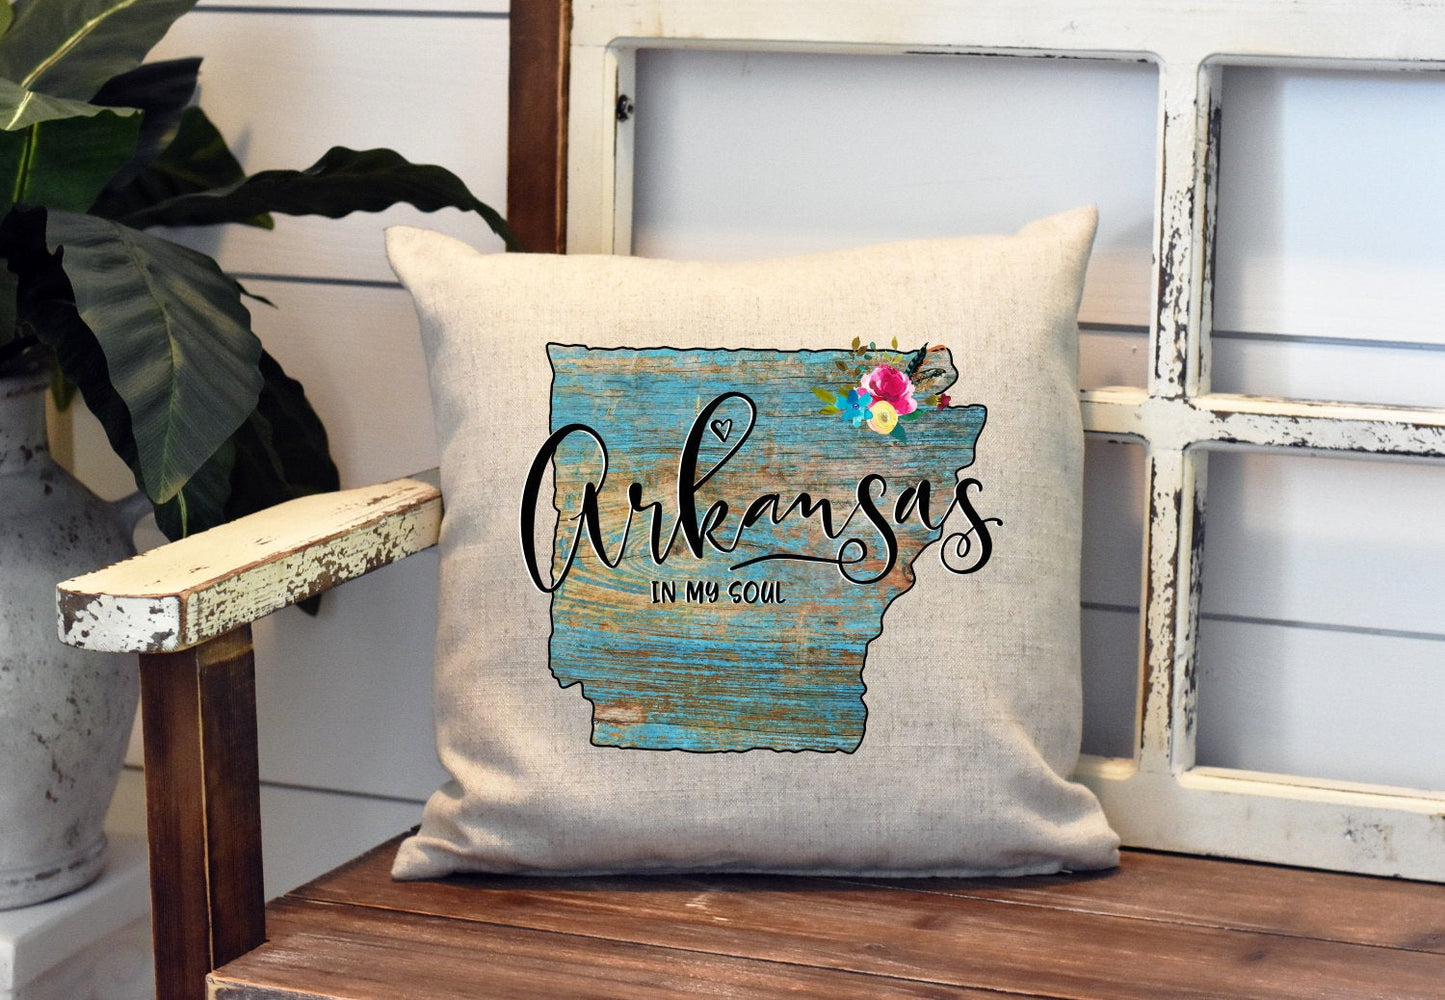 Arkansas In My Soul Pillow Cover - Floral Watercolor - State Of Arkansas Decorations Farmhouse Decor Throw Pillow Cover